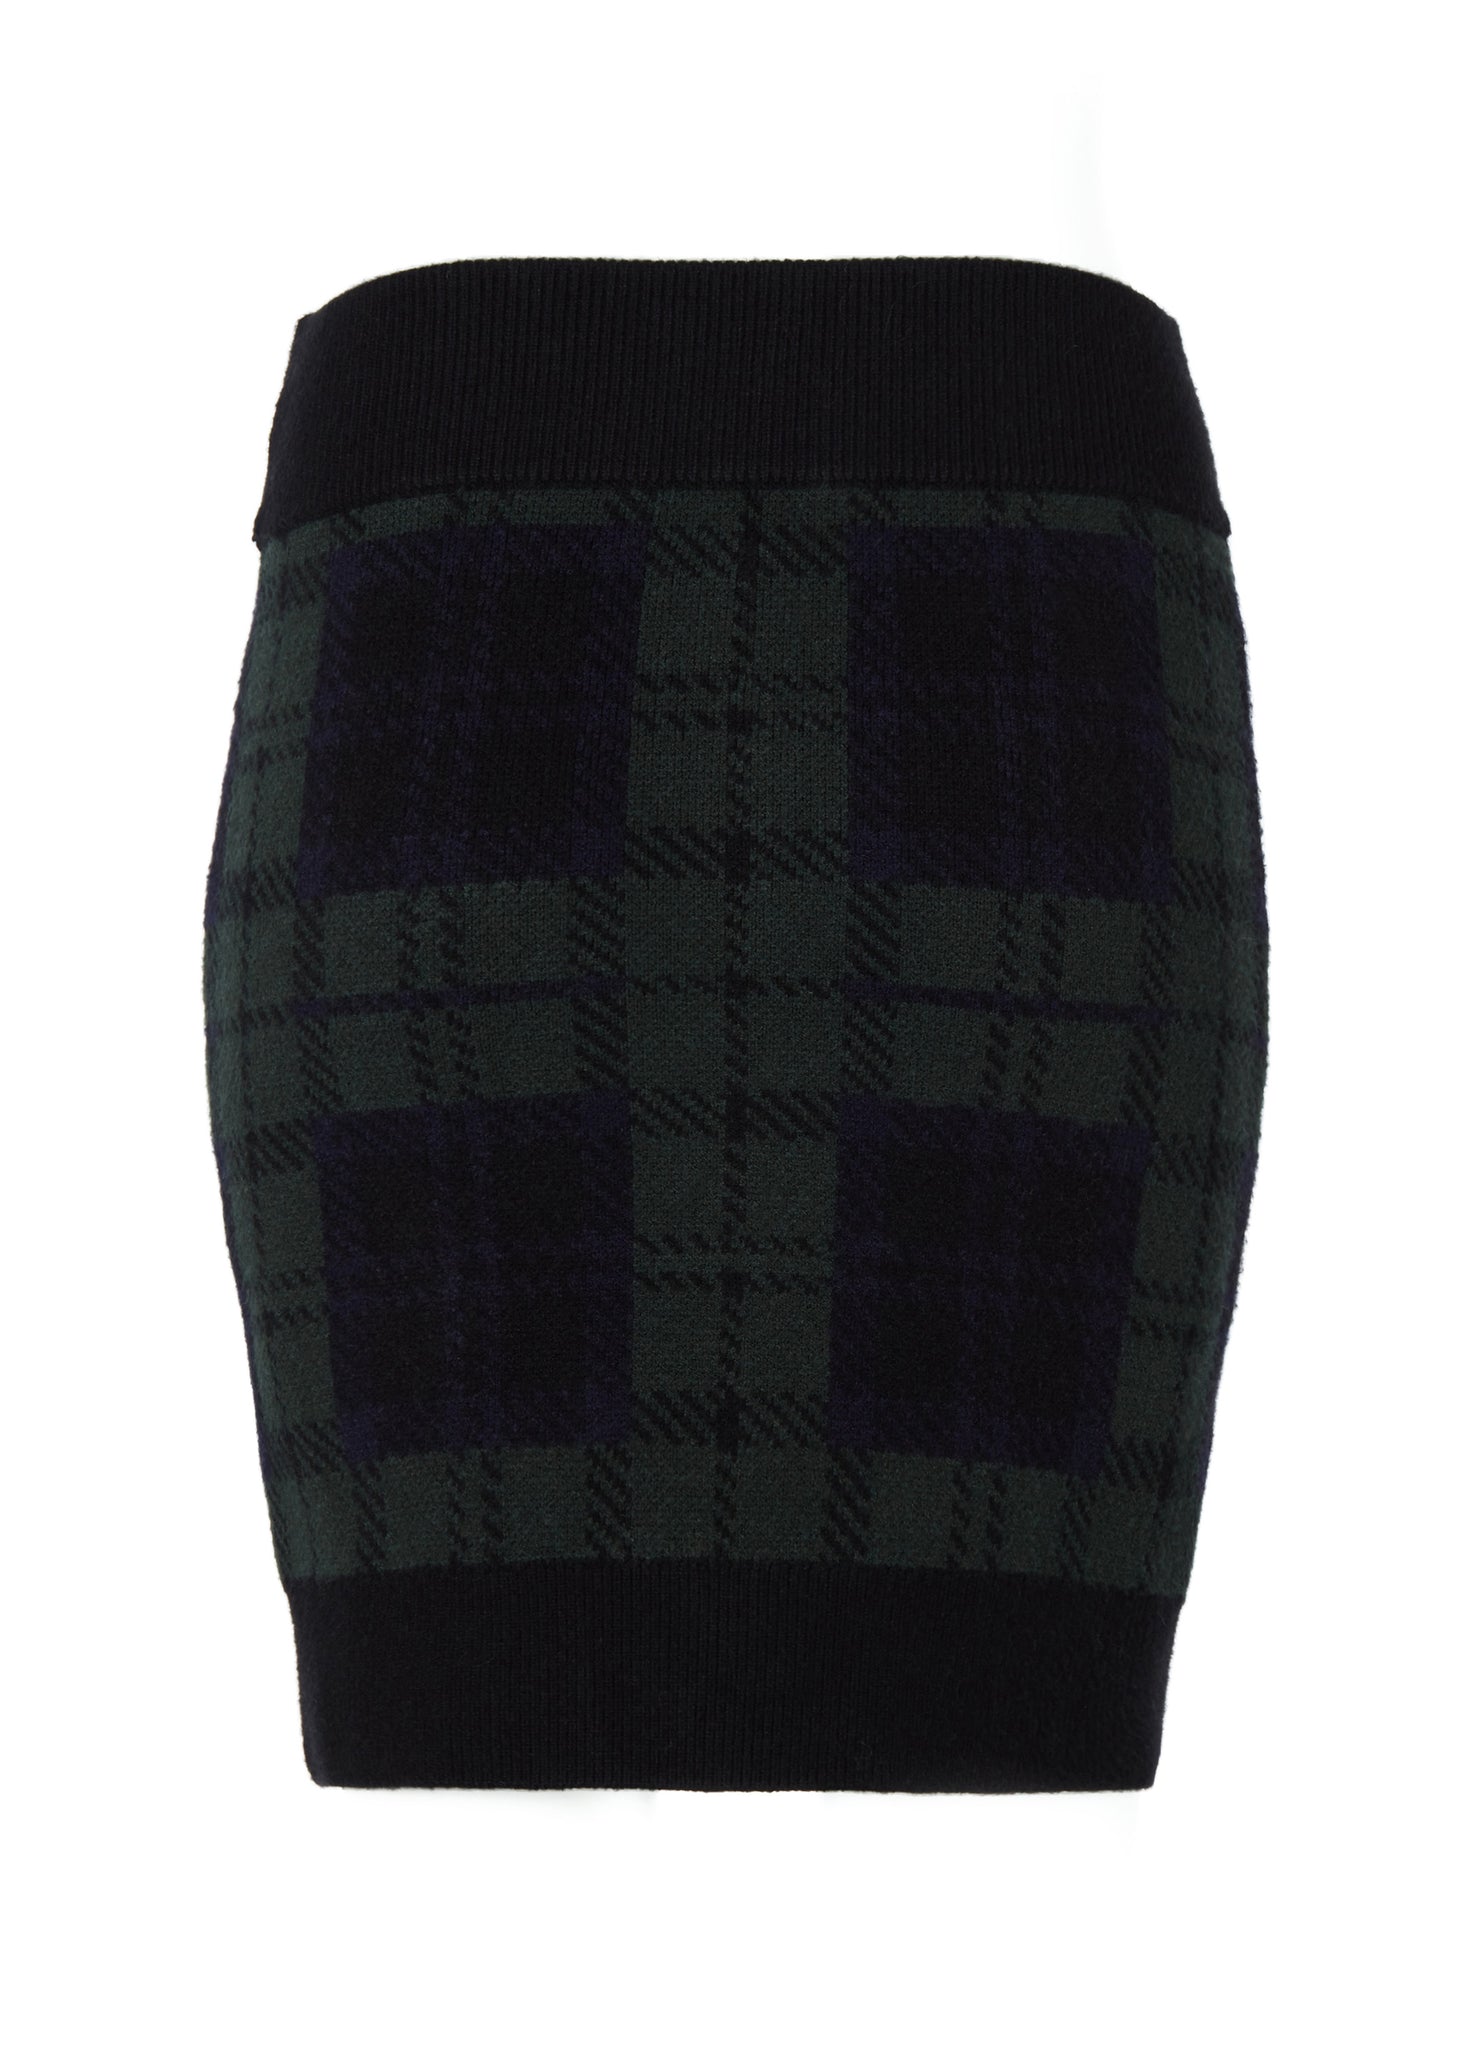 back of womens knitted mini skirt in green back and navy blackwatch pattern with contrast eibbed waistband centre front panel welt pockets and hem with gold button detail down the front and on each pocket